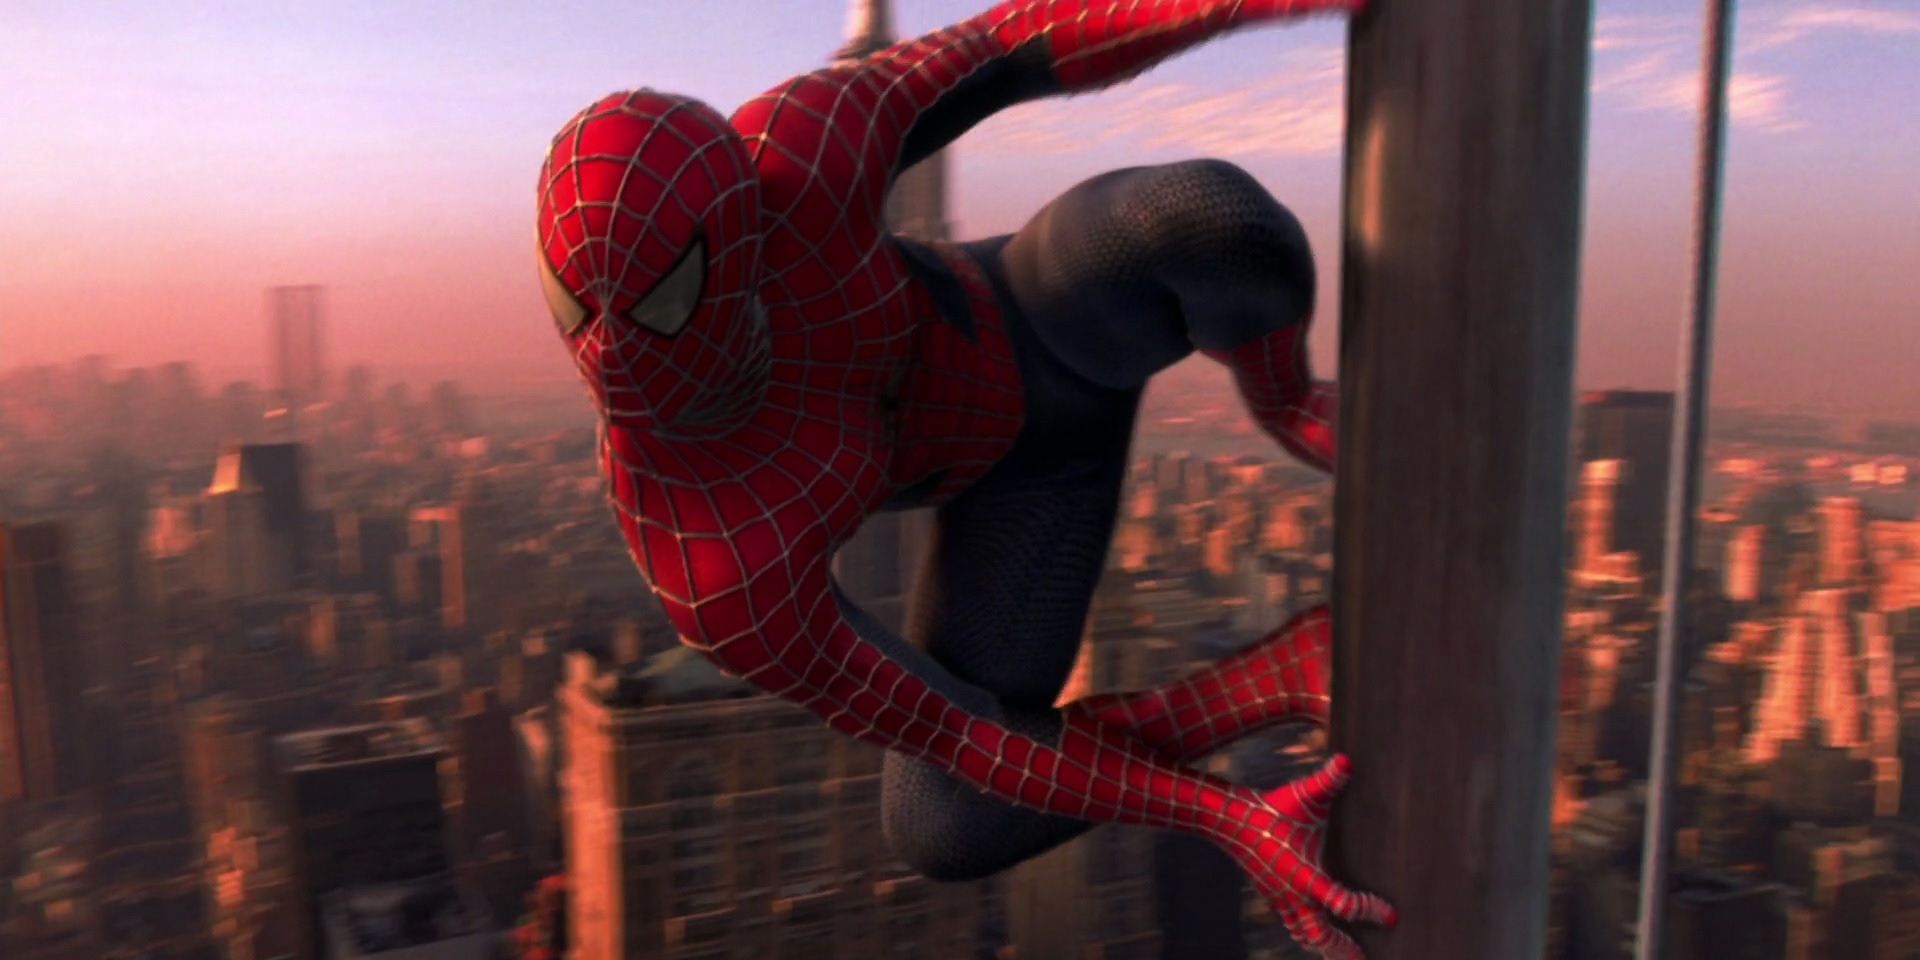 Spider Man on a flagpole in the original 2002 movie